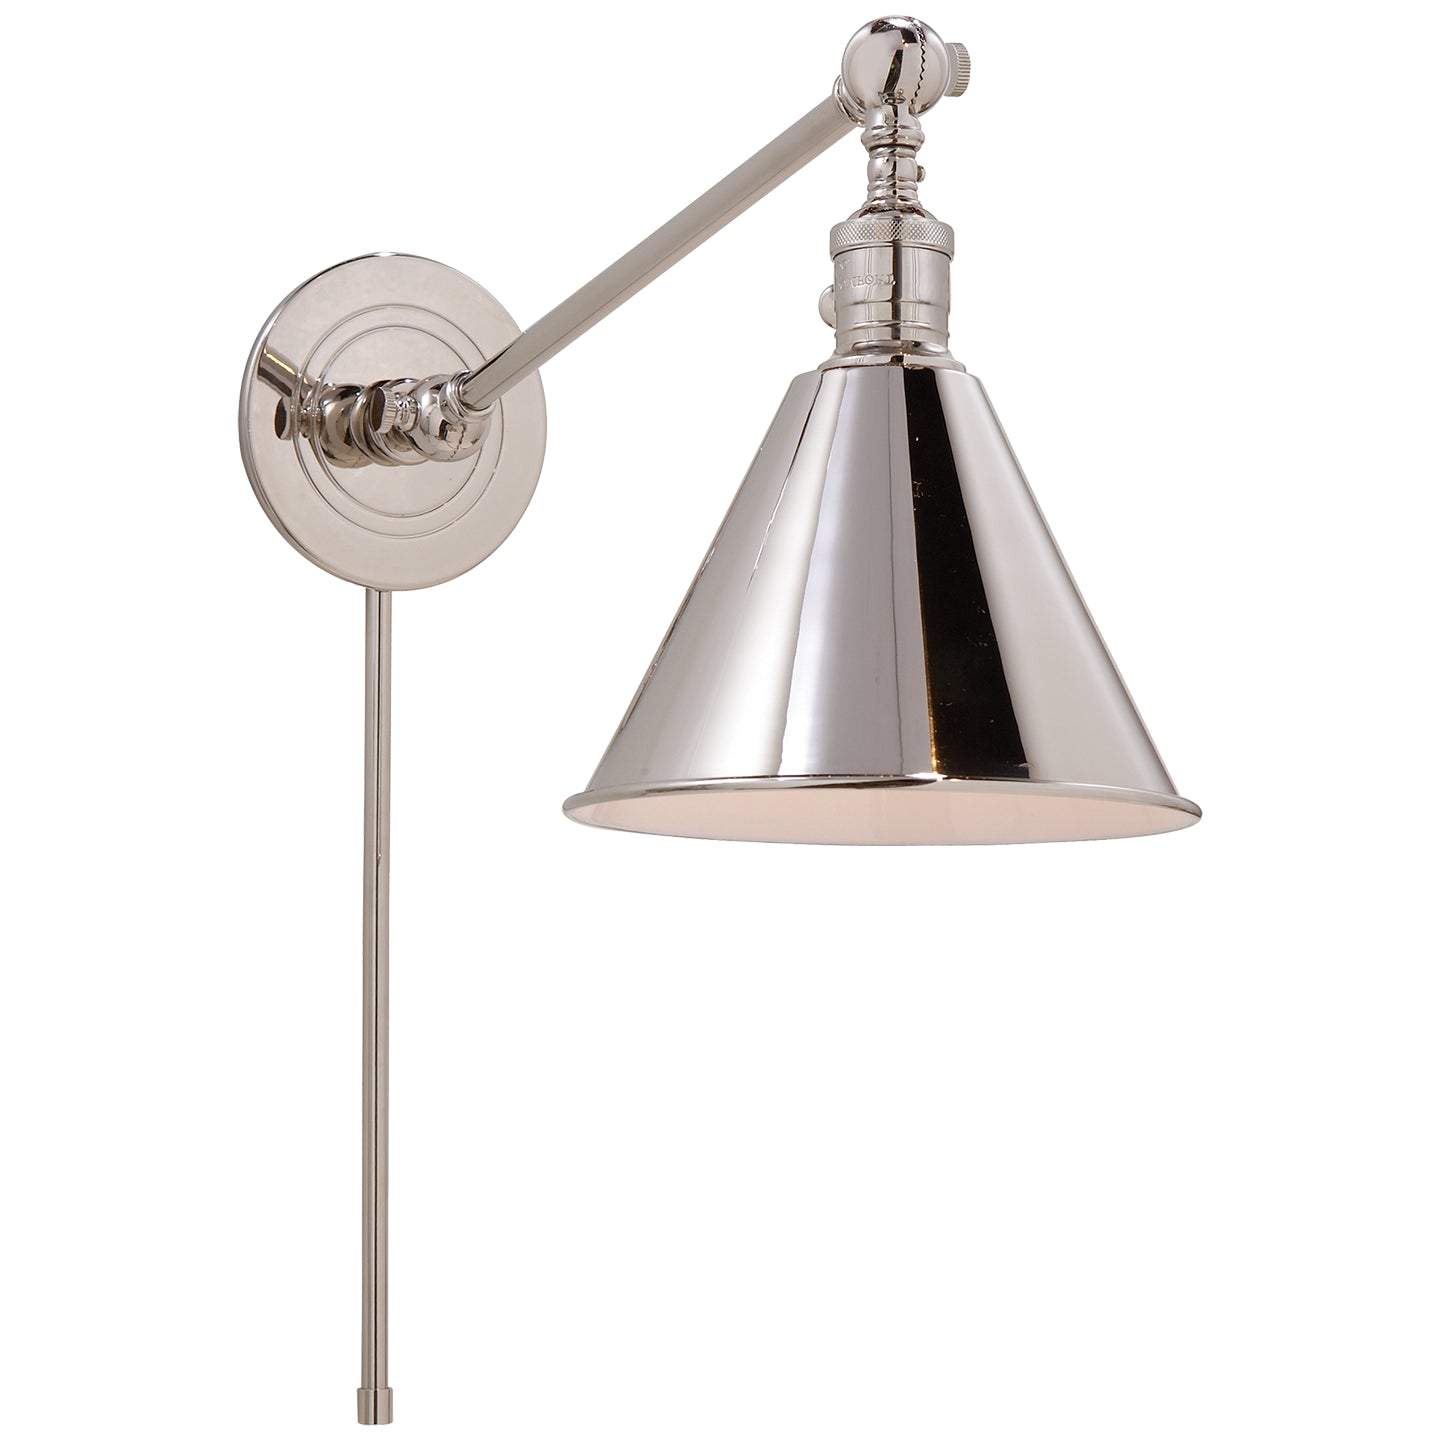 Visual Comfort Signature - SL 2922PN - One Light Wall Sconce - Boston Functional - Polished Nickel